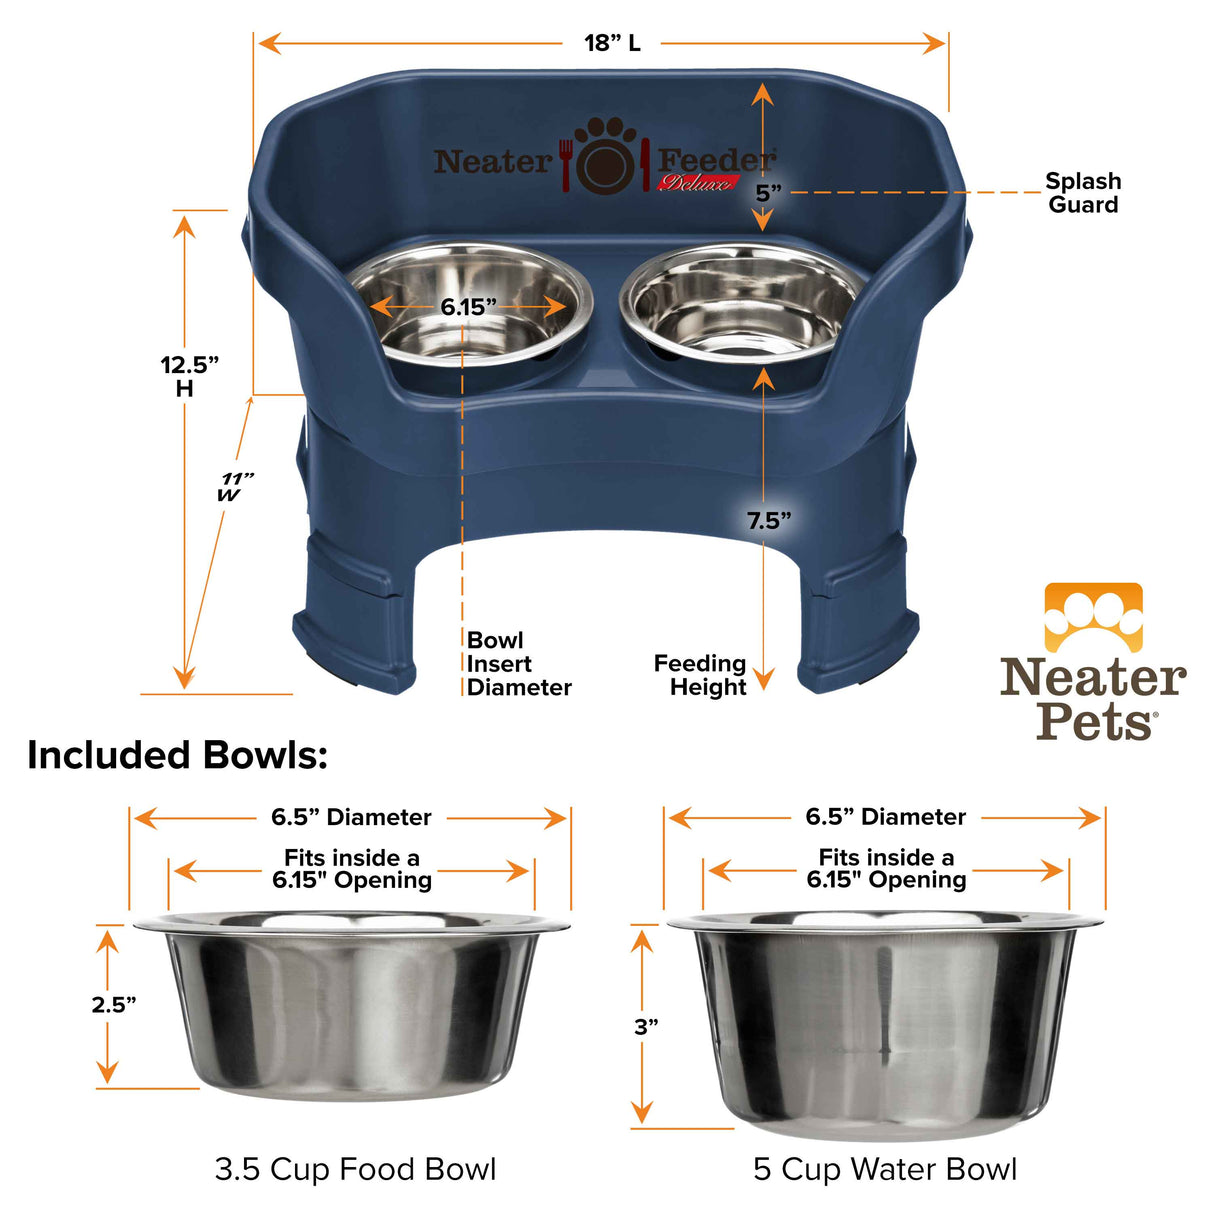 Deluxe Dark Blue Medium Dog Neater Feeder with leg extensions and Bowl dimensions